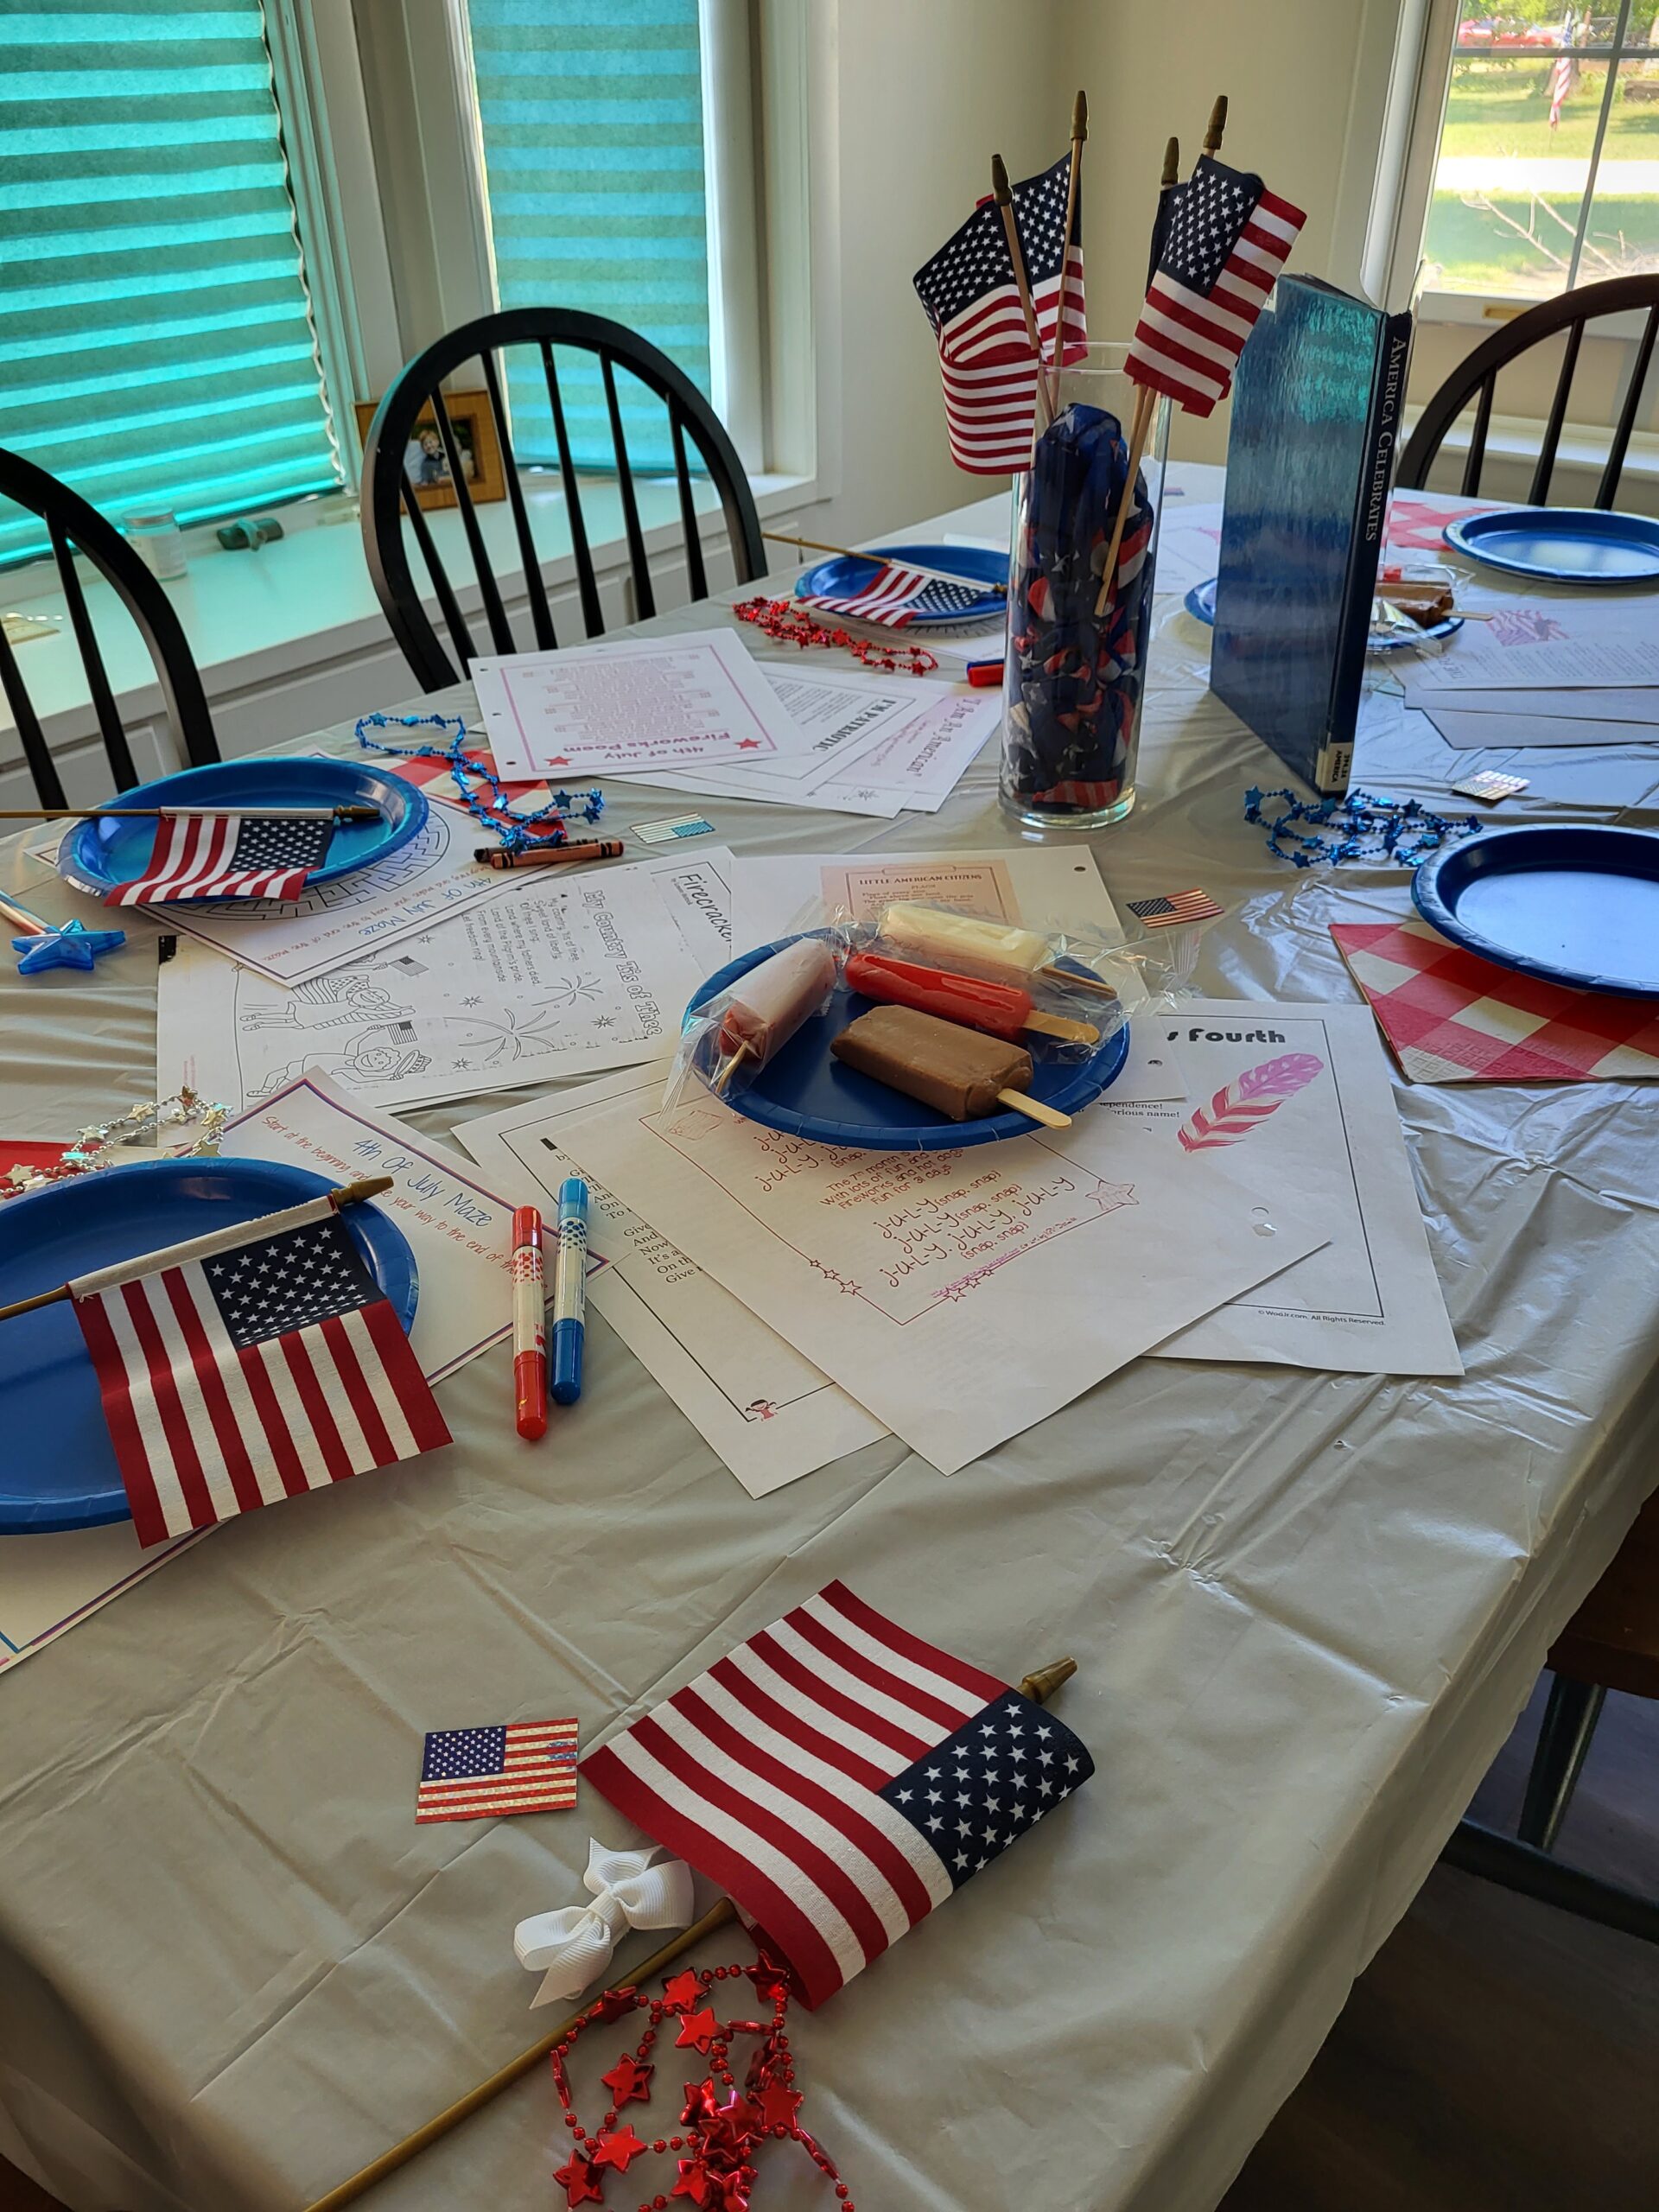 5 Steps for an Exciting 4th of July Poetry Party